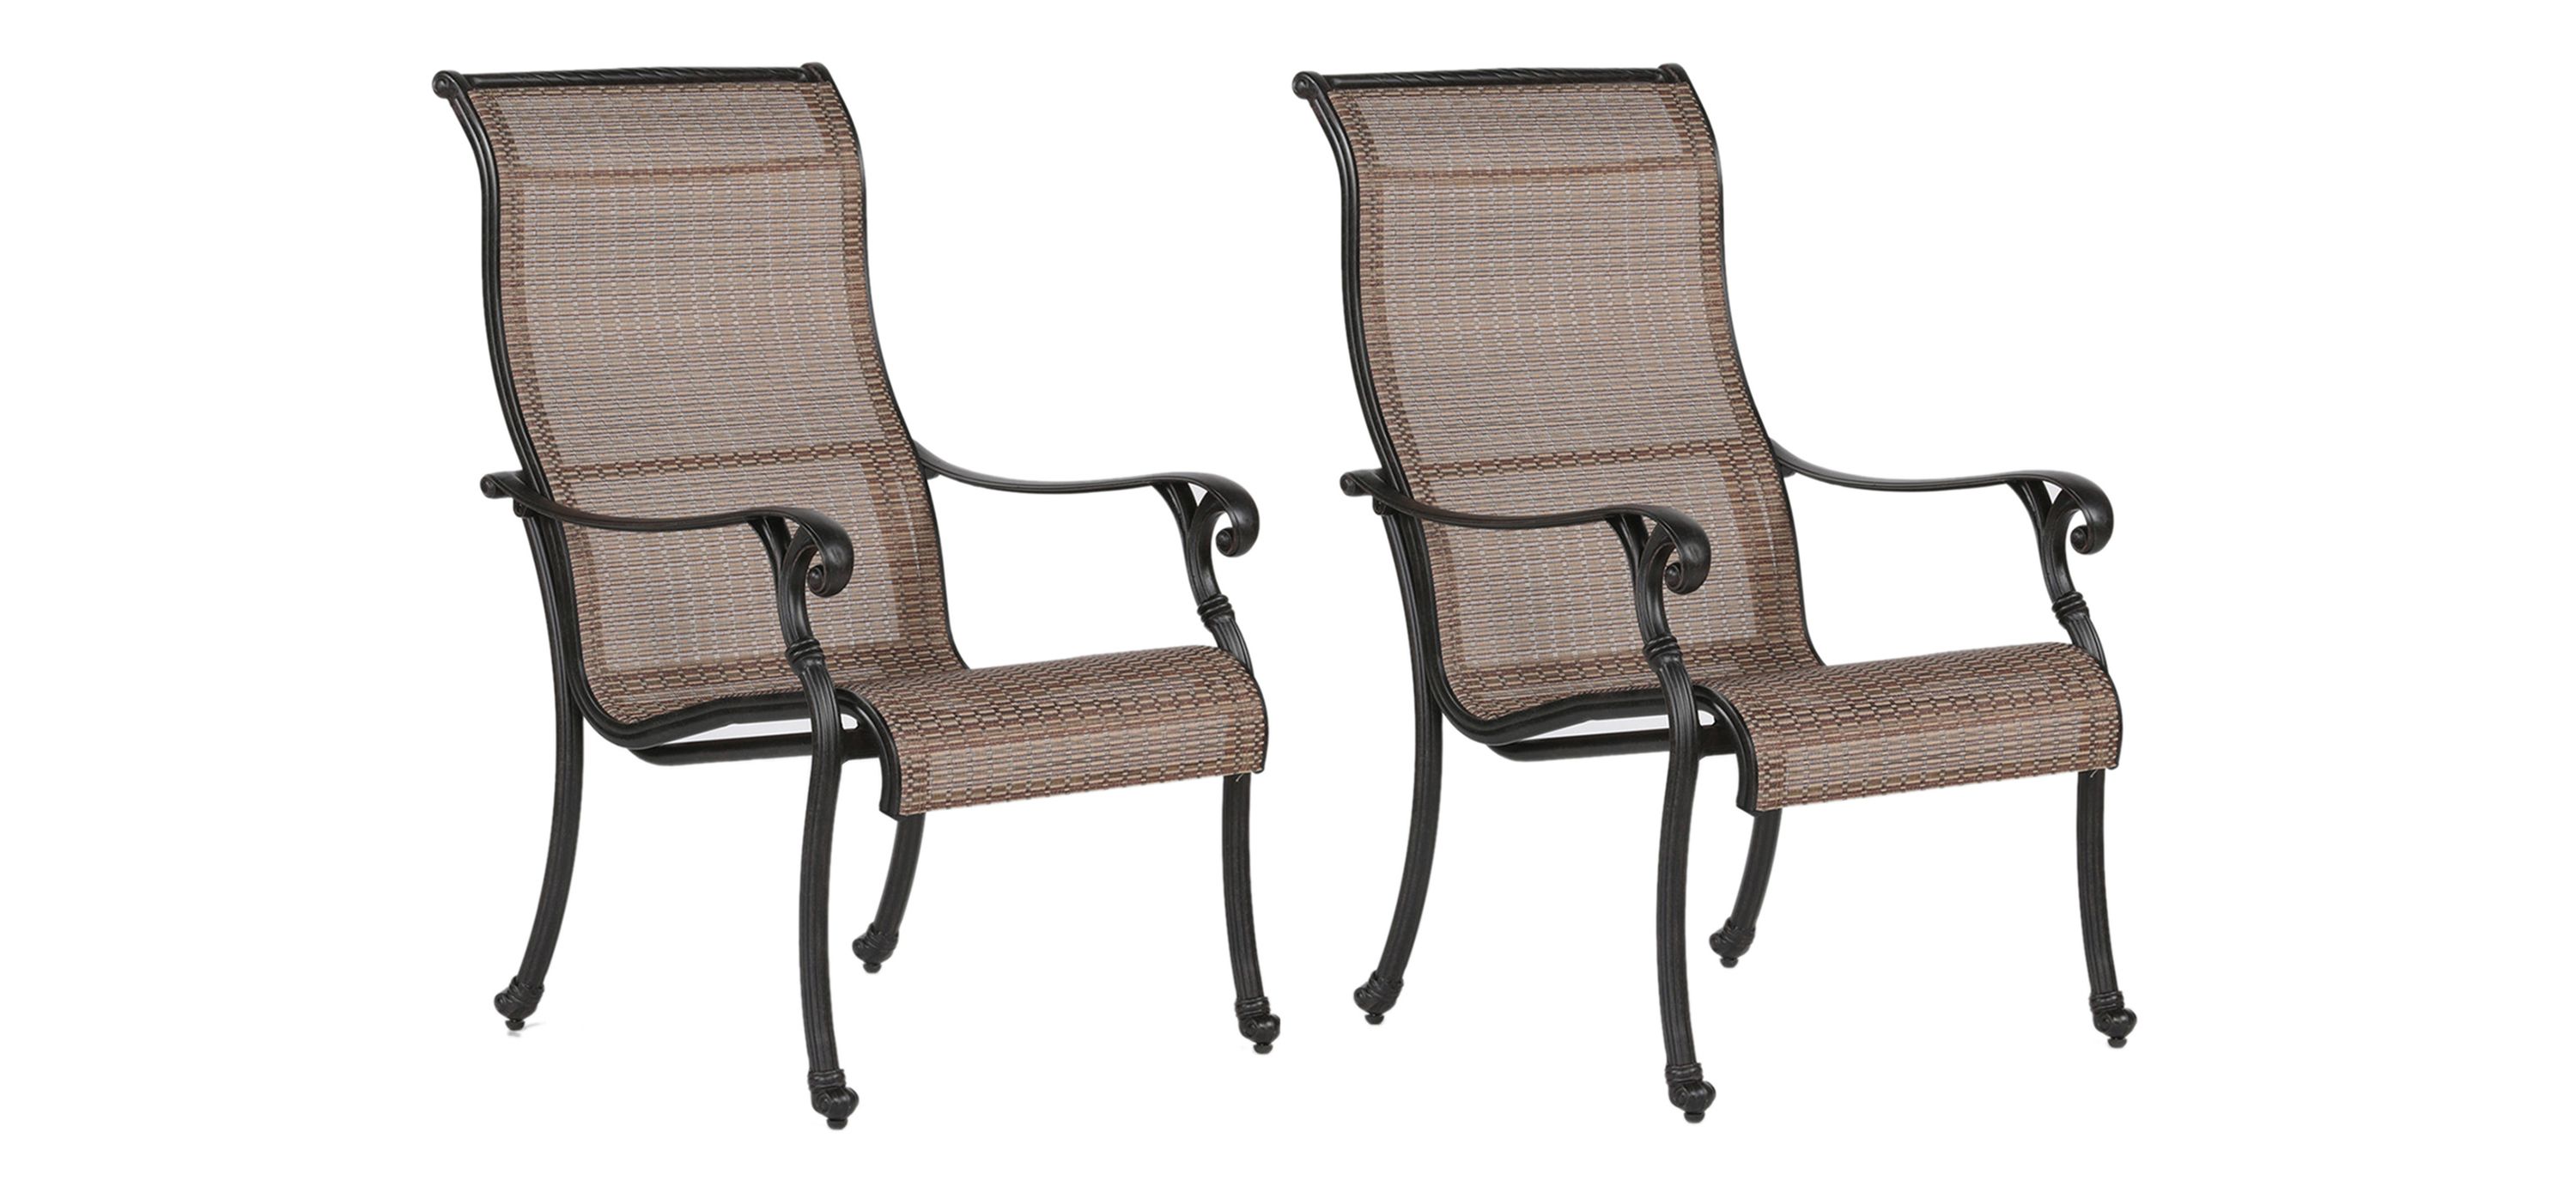 Castle Rock Outdoor Sling Dining Chair, Set of 2